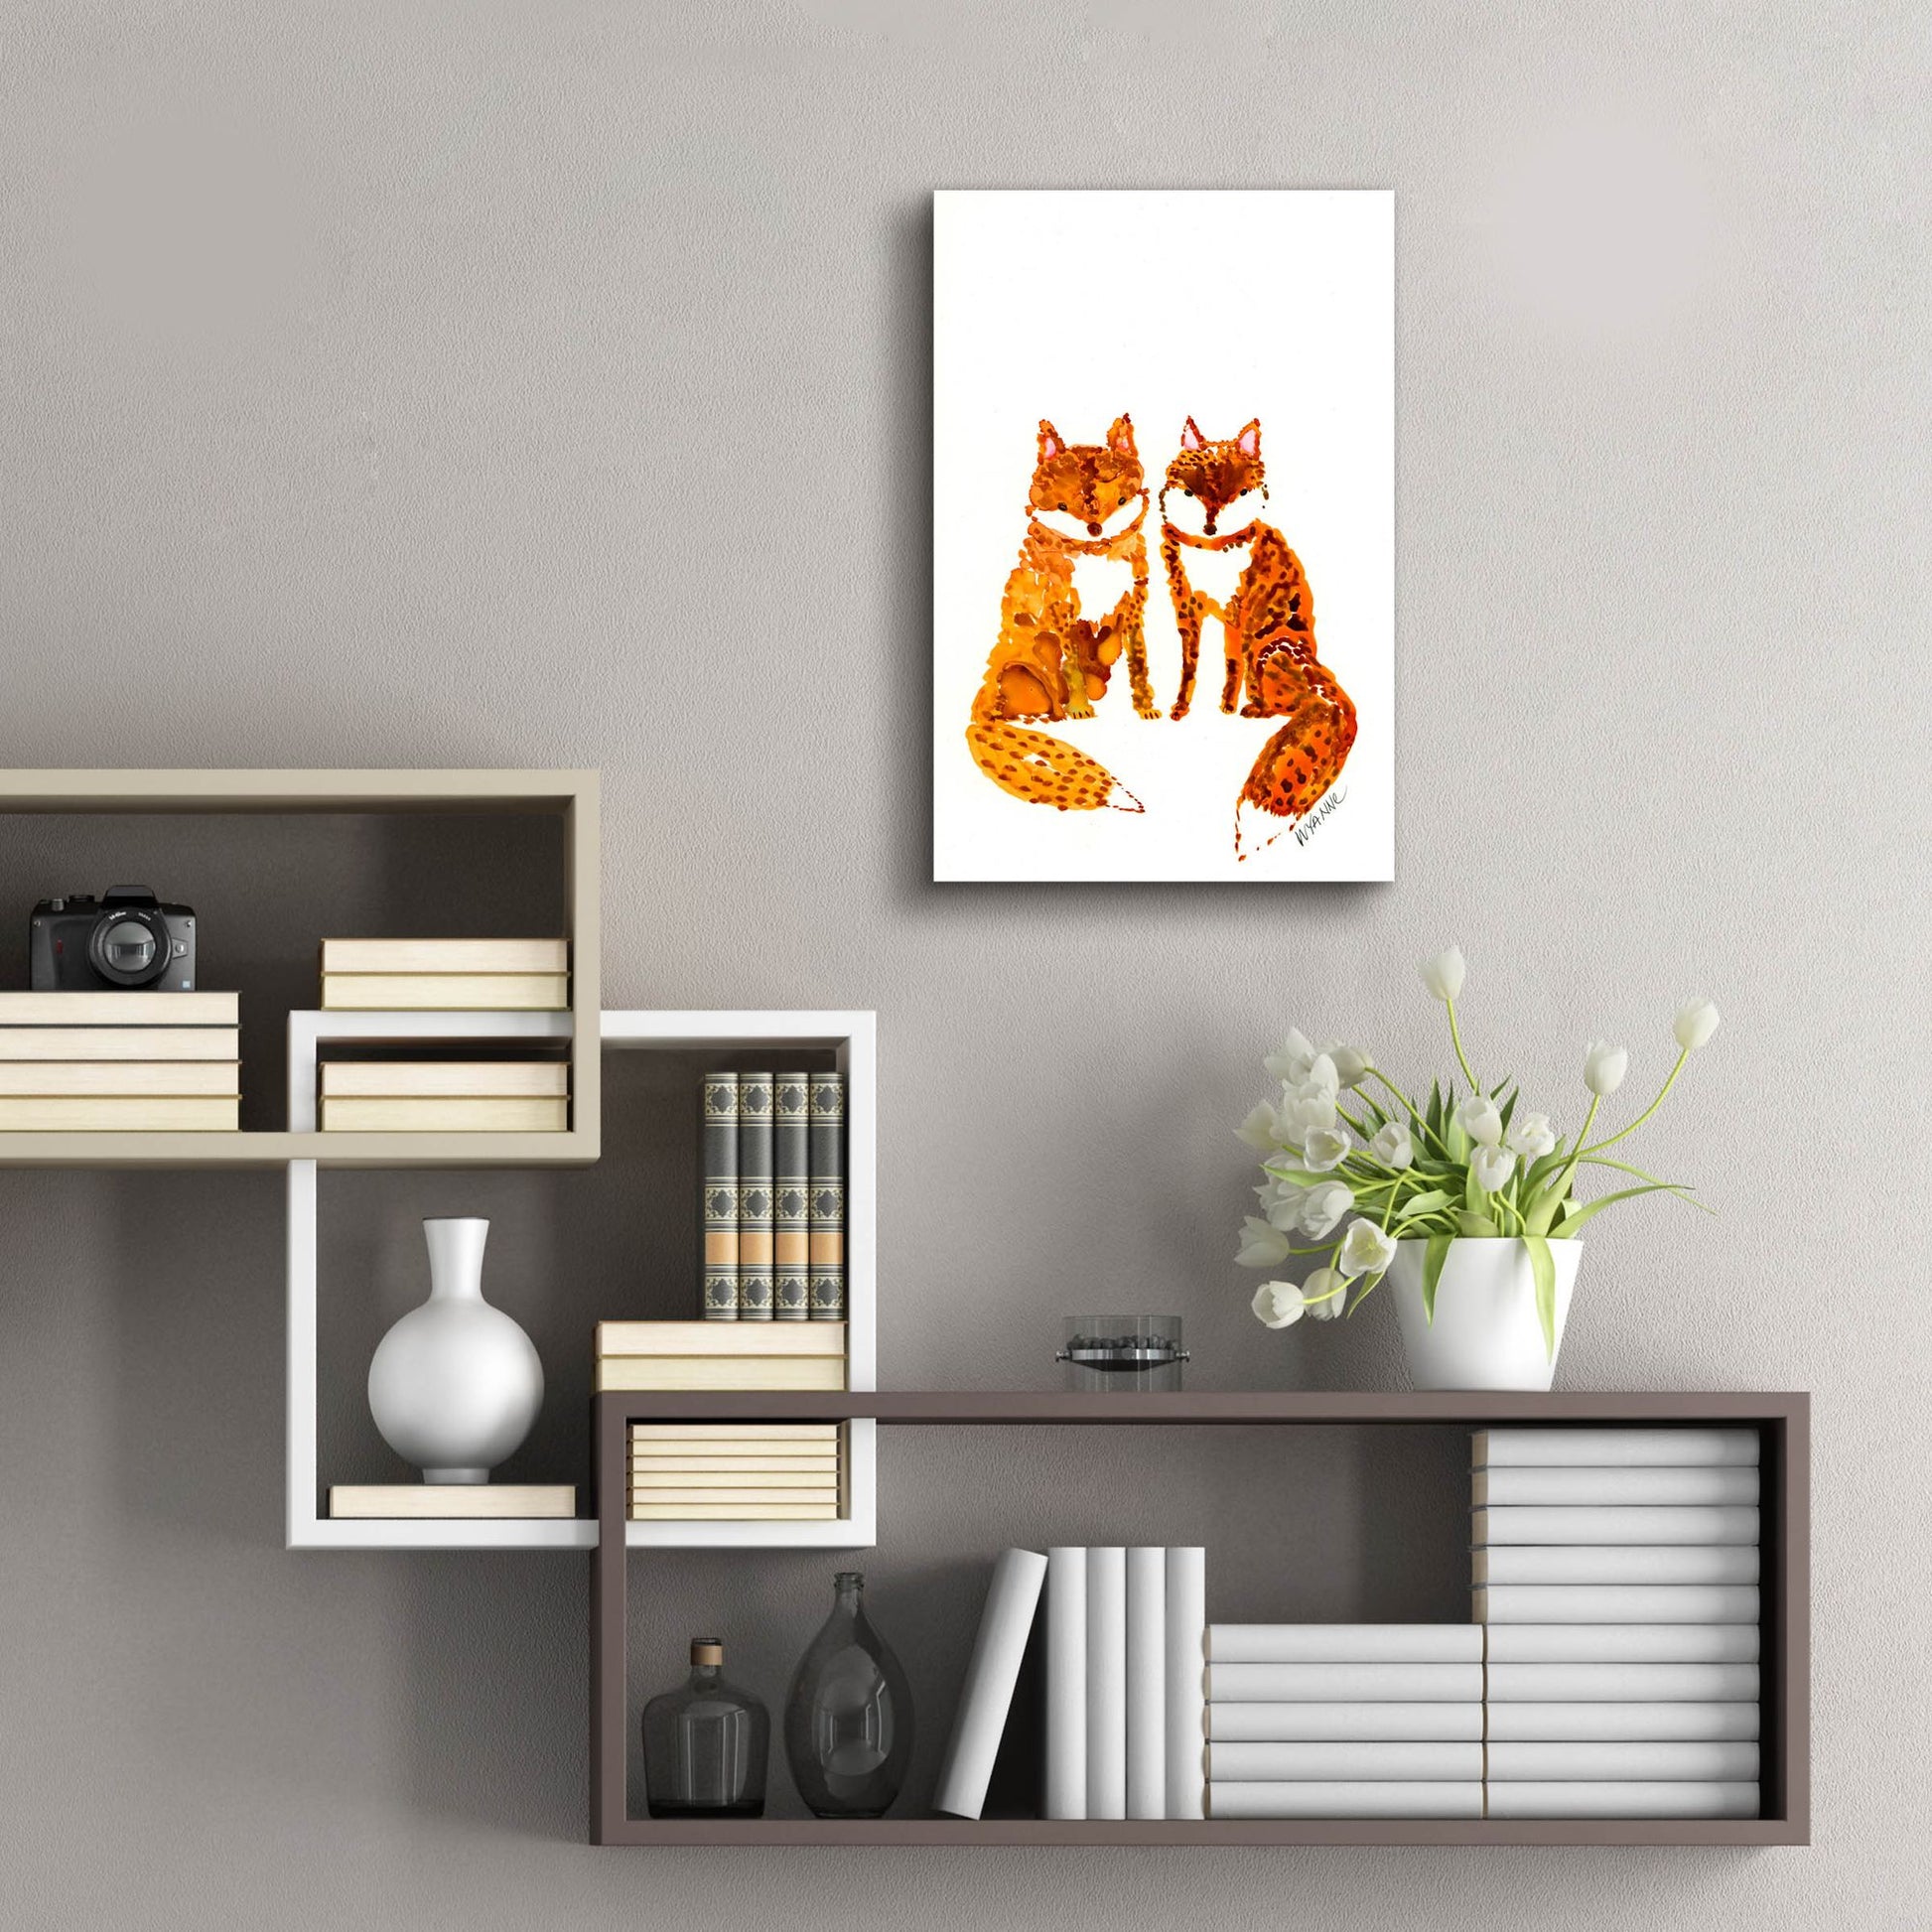 Epic Art 'Two Baby Foxes' by Wyanne, Acrylic Glass Wall Art,16x24